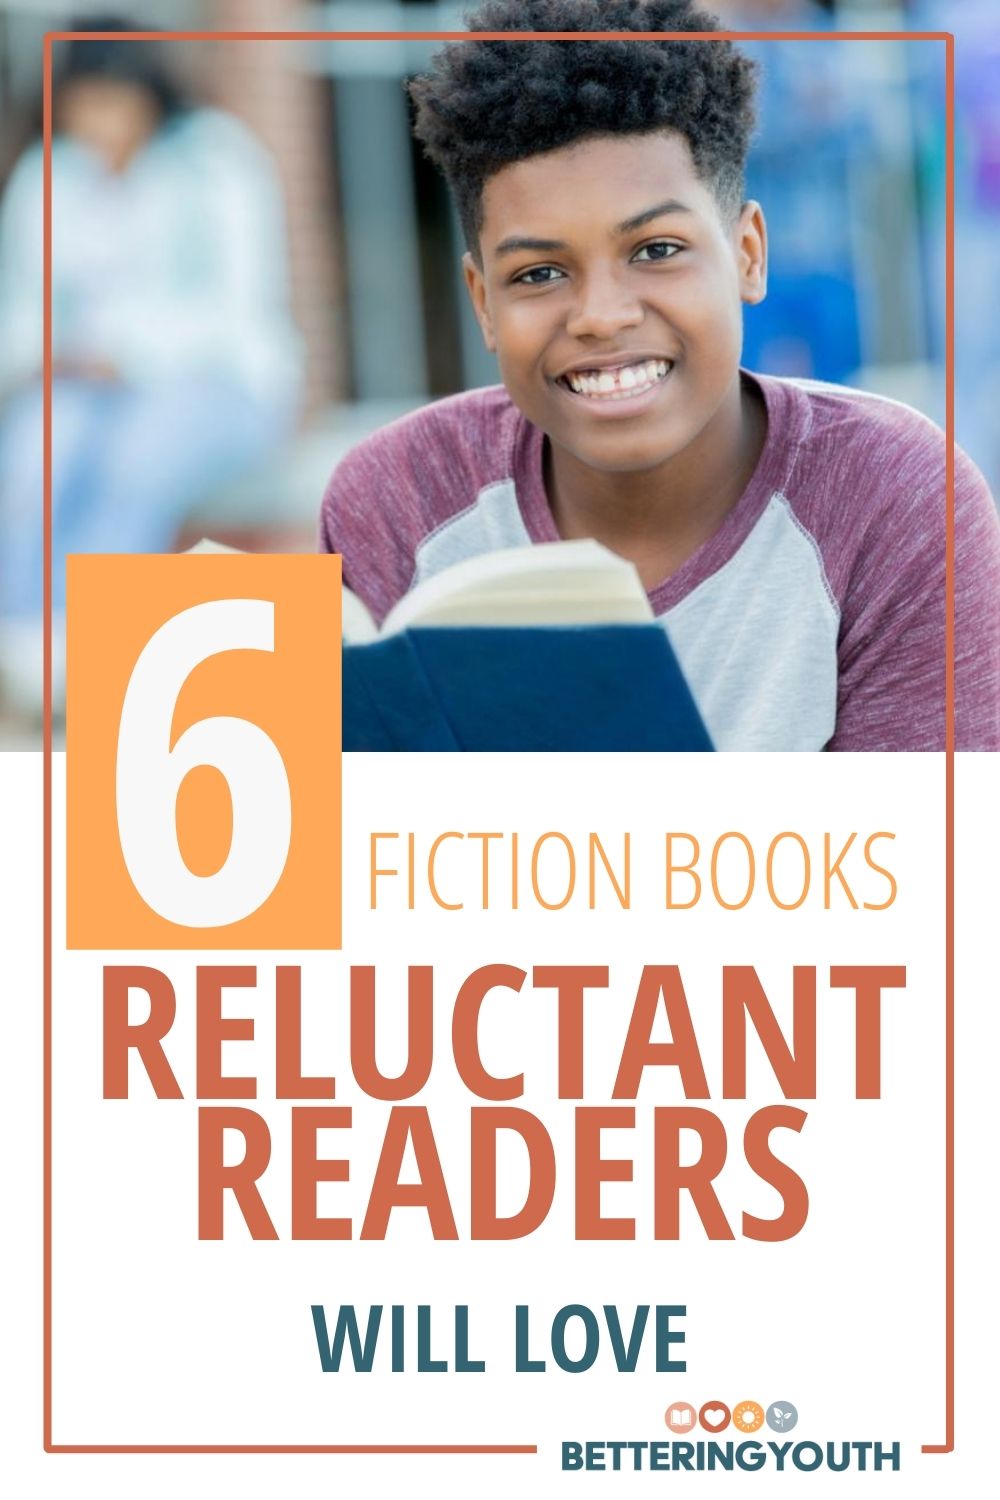 6 Book Recommendations Reluctant Readers will Love